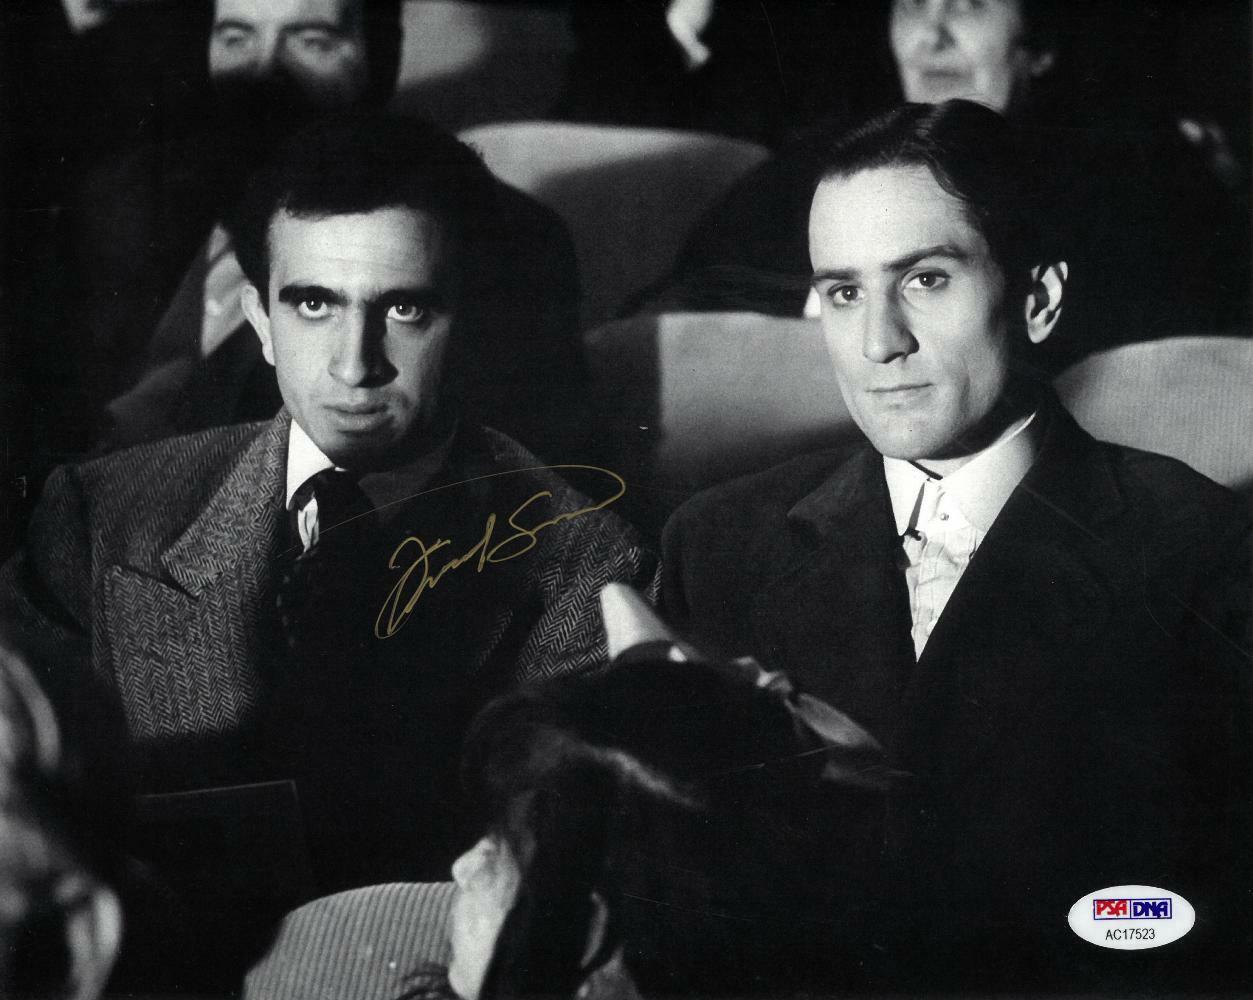 Frank Sivero Signed Godfather Authentic Autographed 8x10 Photo Poster painting PSA/DNA #AC17523